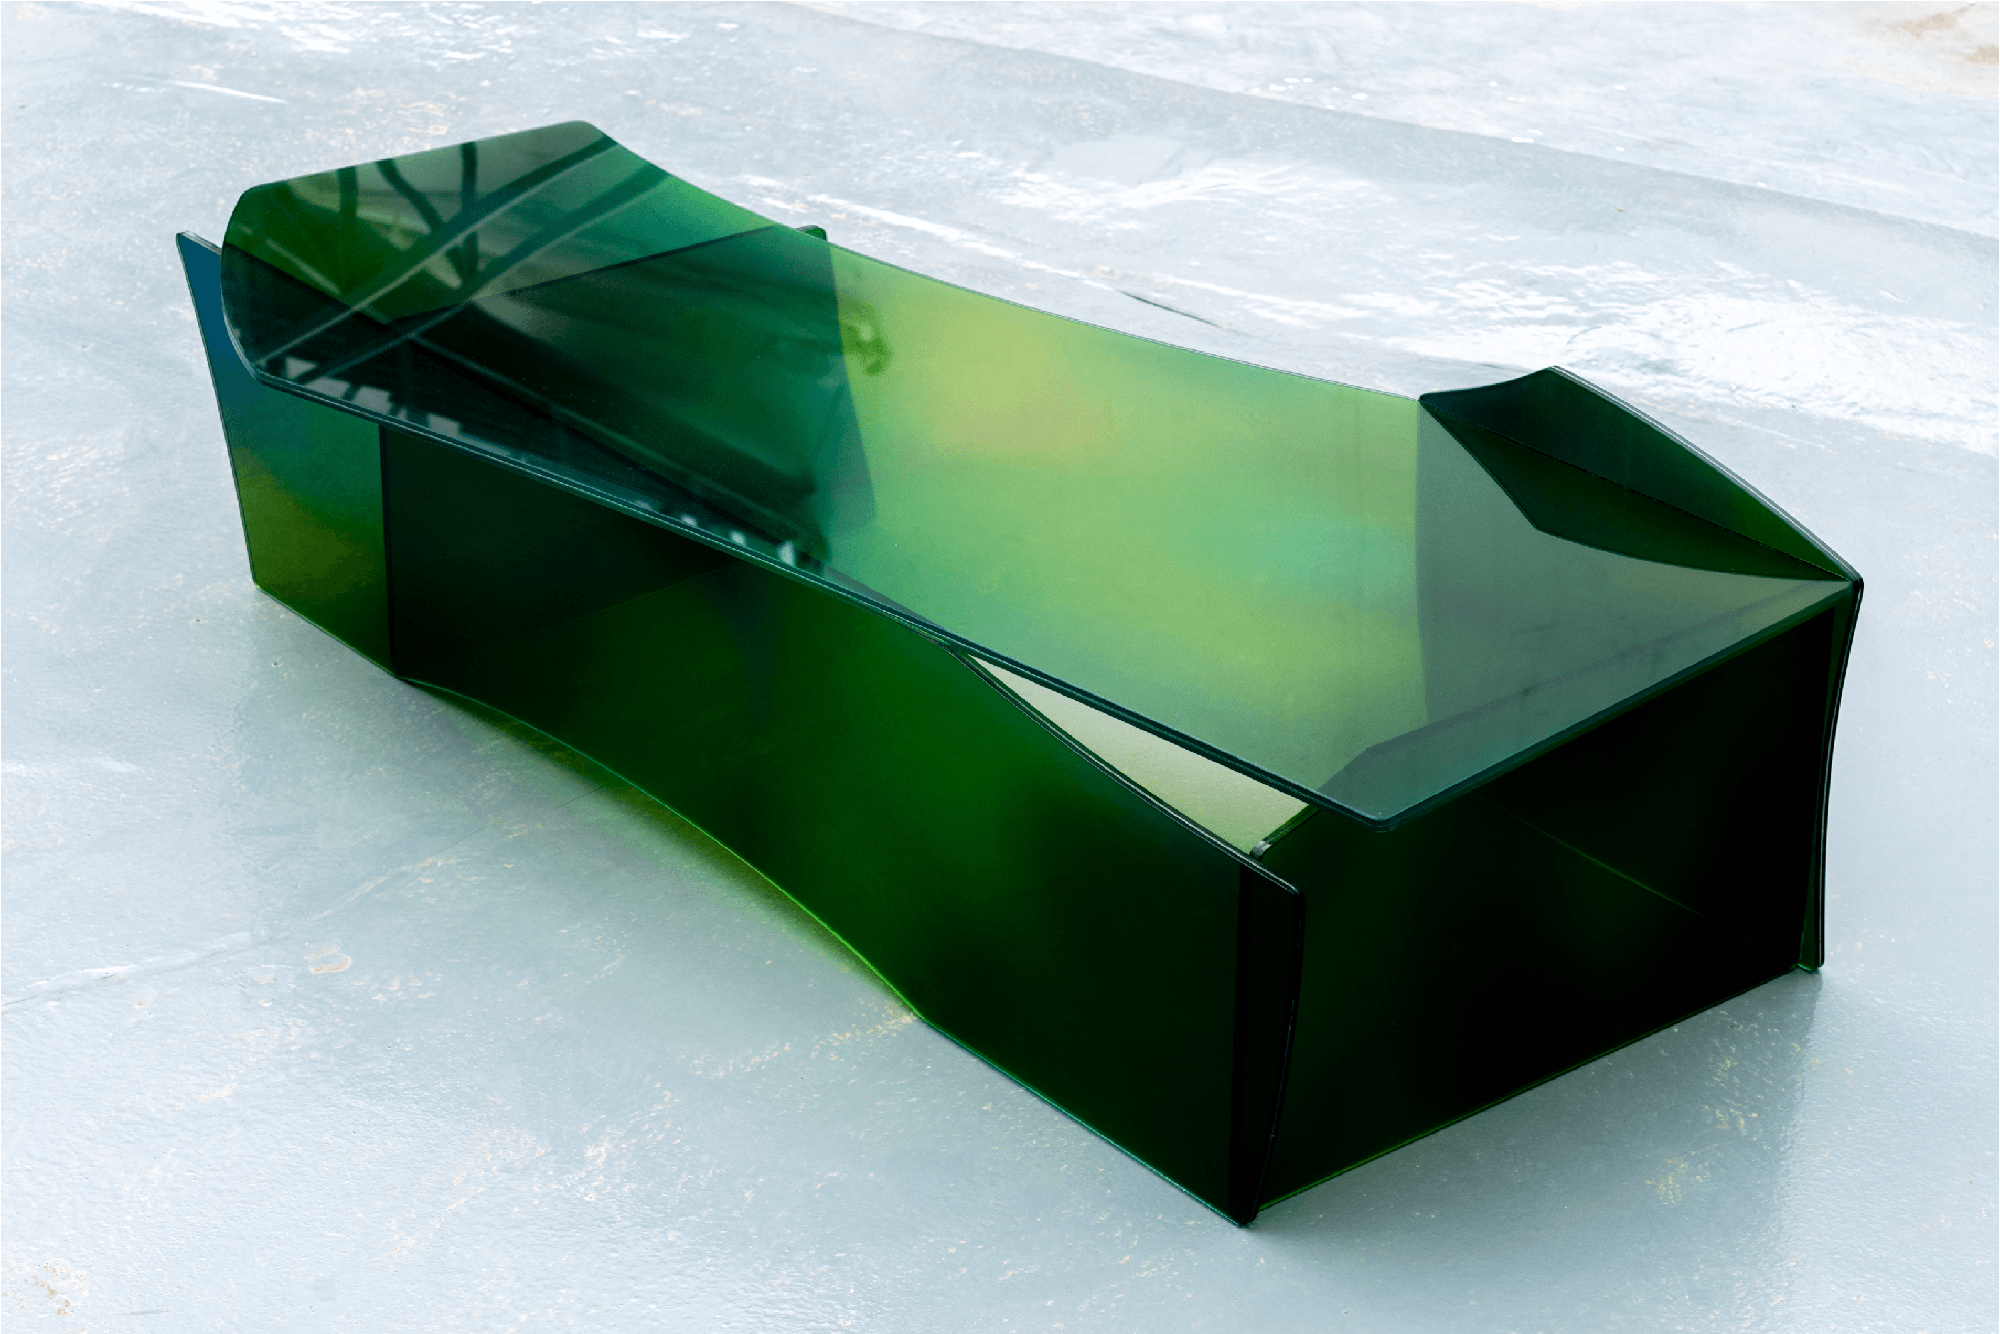 Green ombre glass table by Studio Cha Cha in the 'Archetypes' Group Show at Alcova Milan during Milan Design Week, 2021 